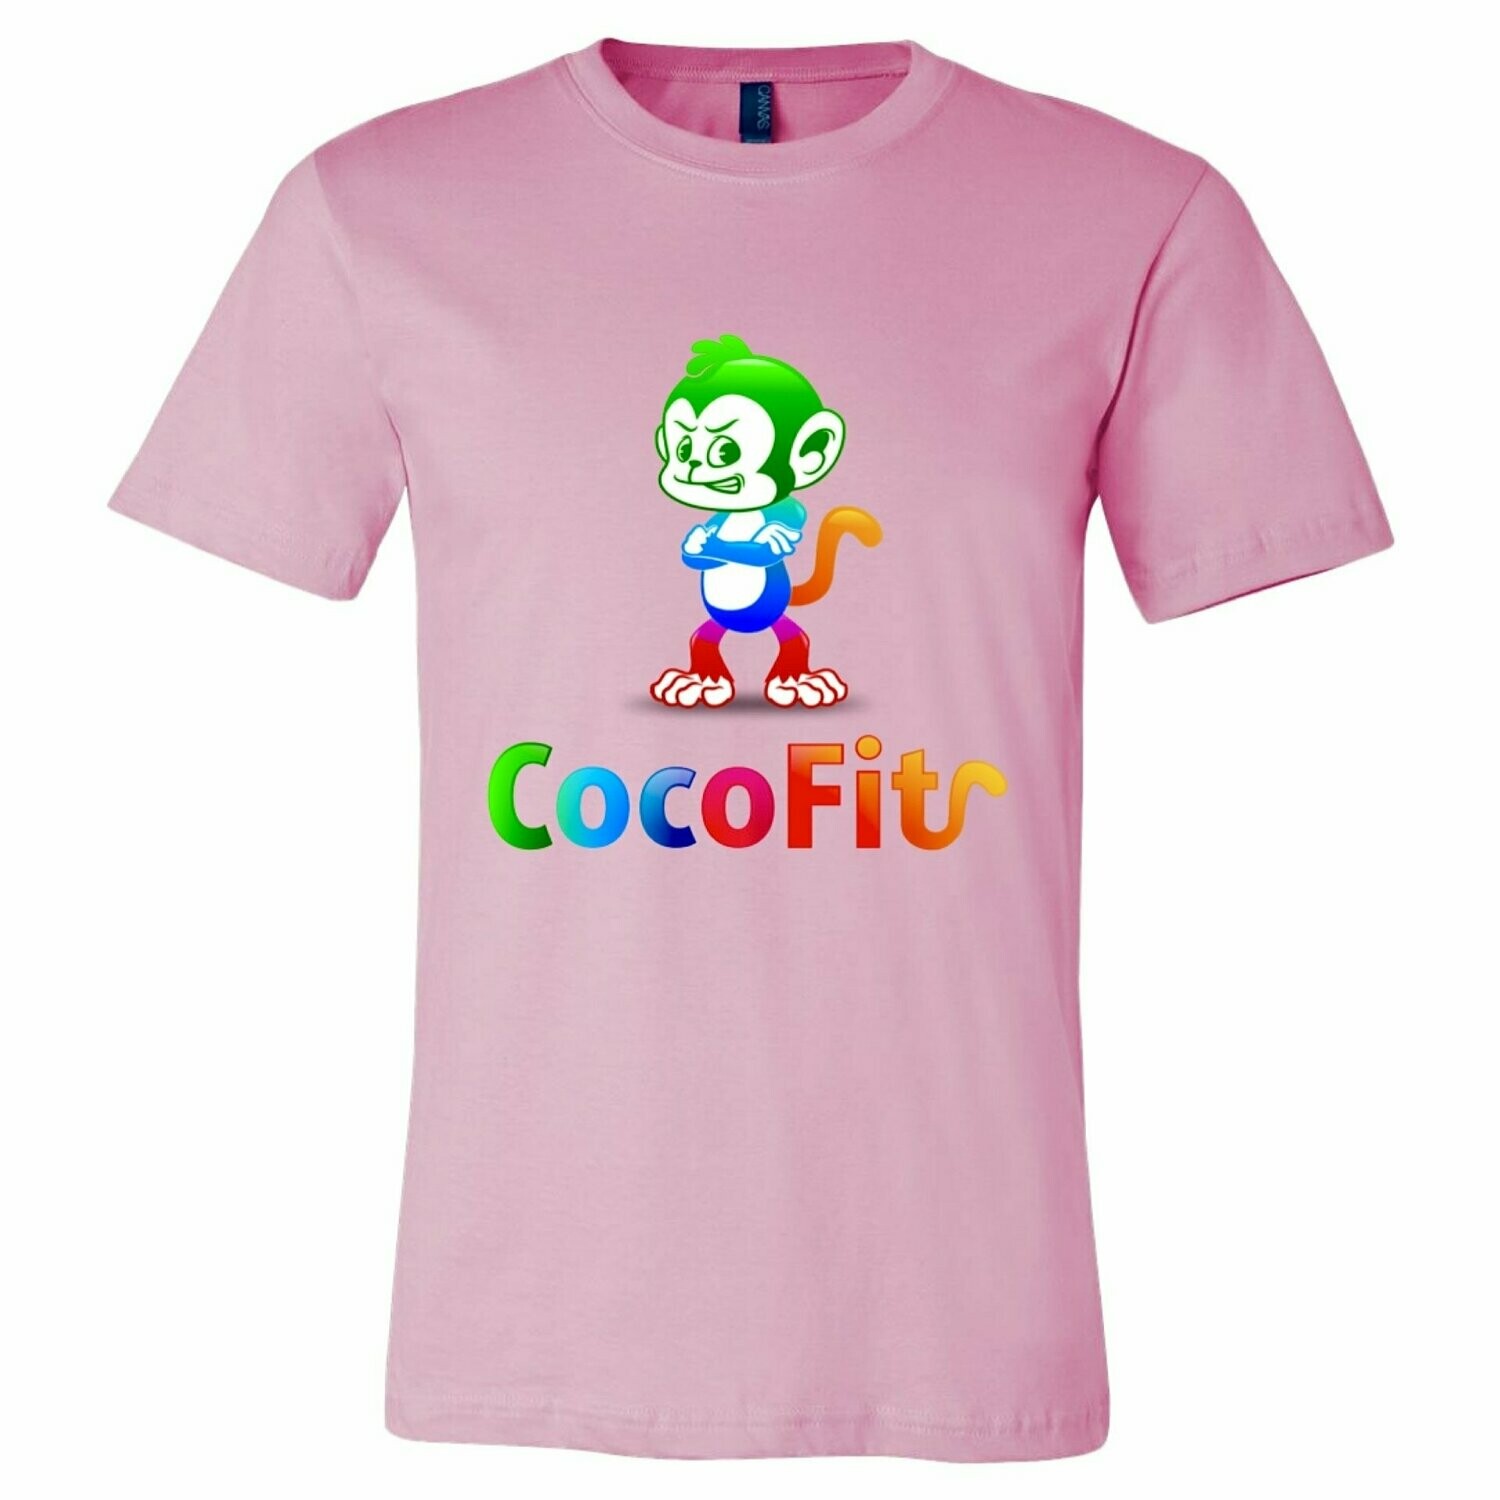 CocoFit T-Shirt in Pink